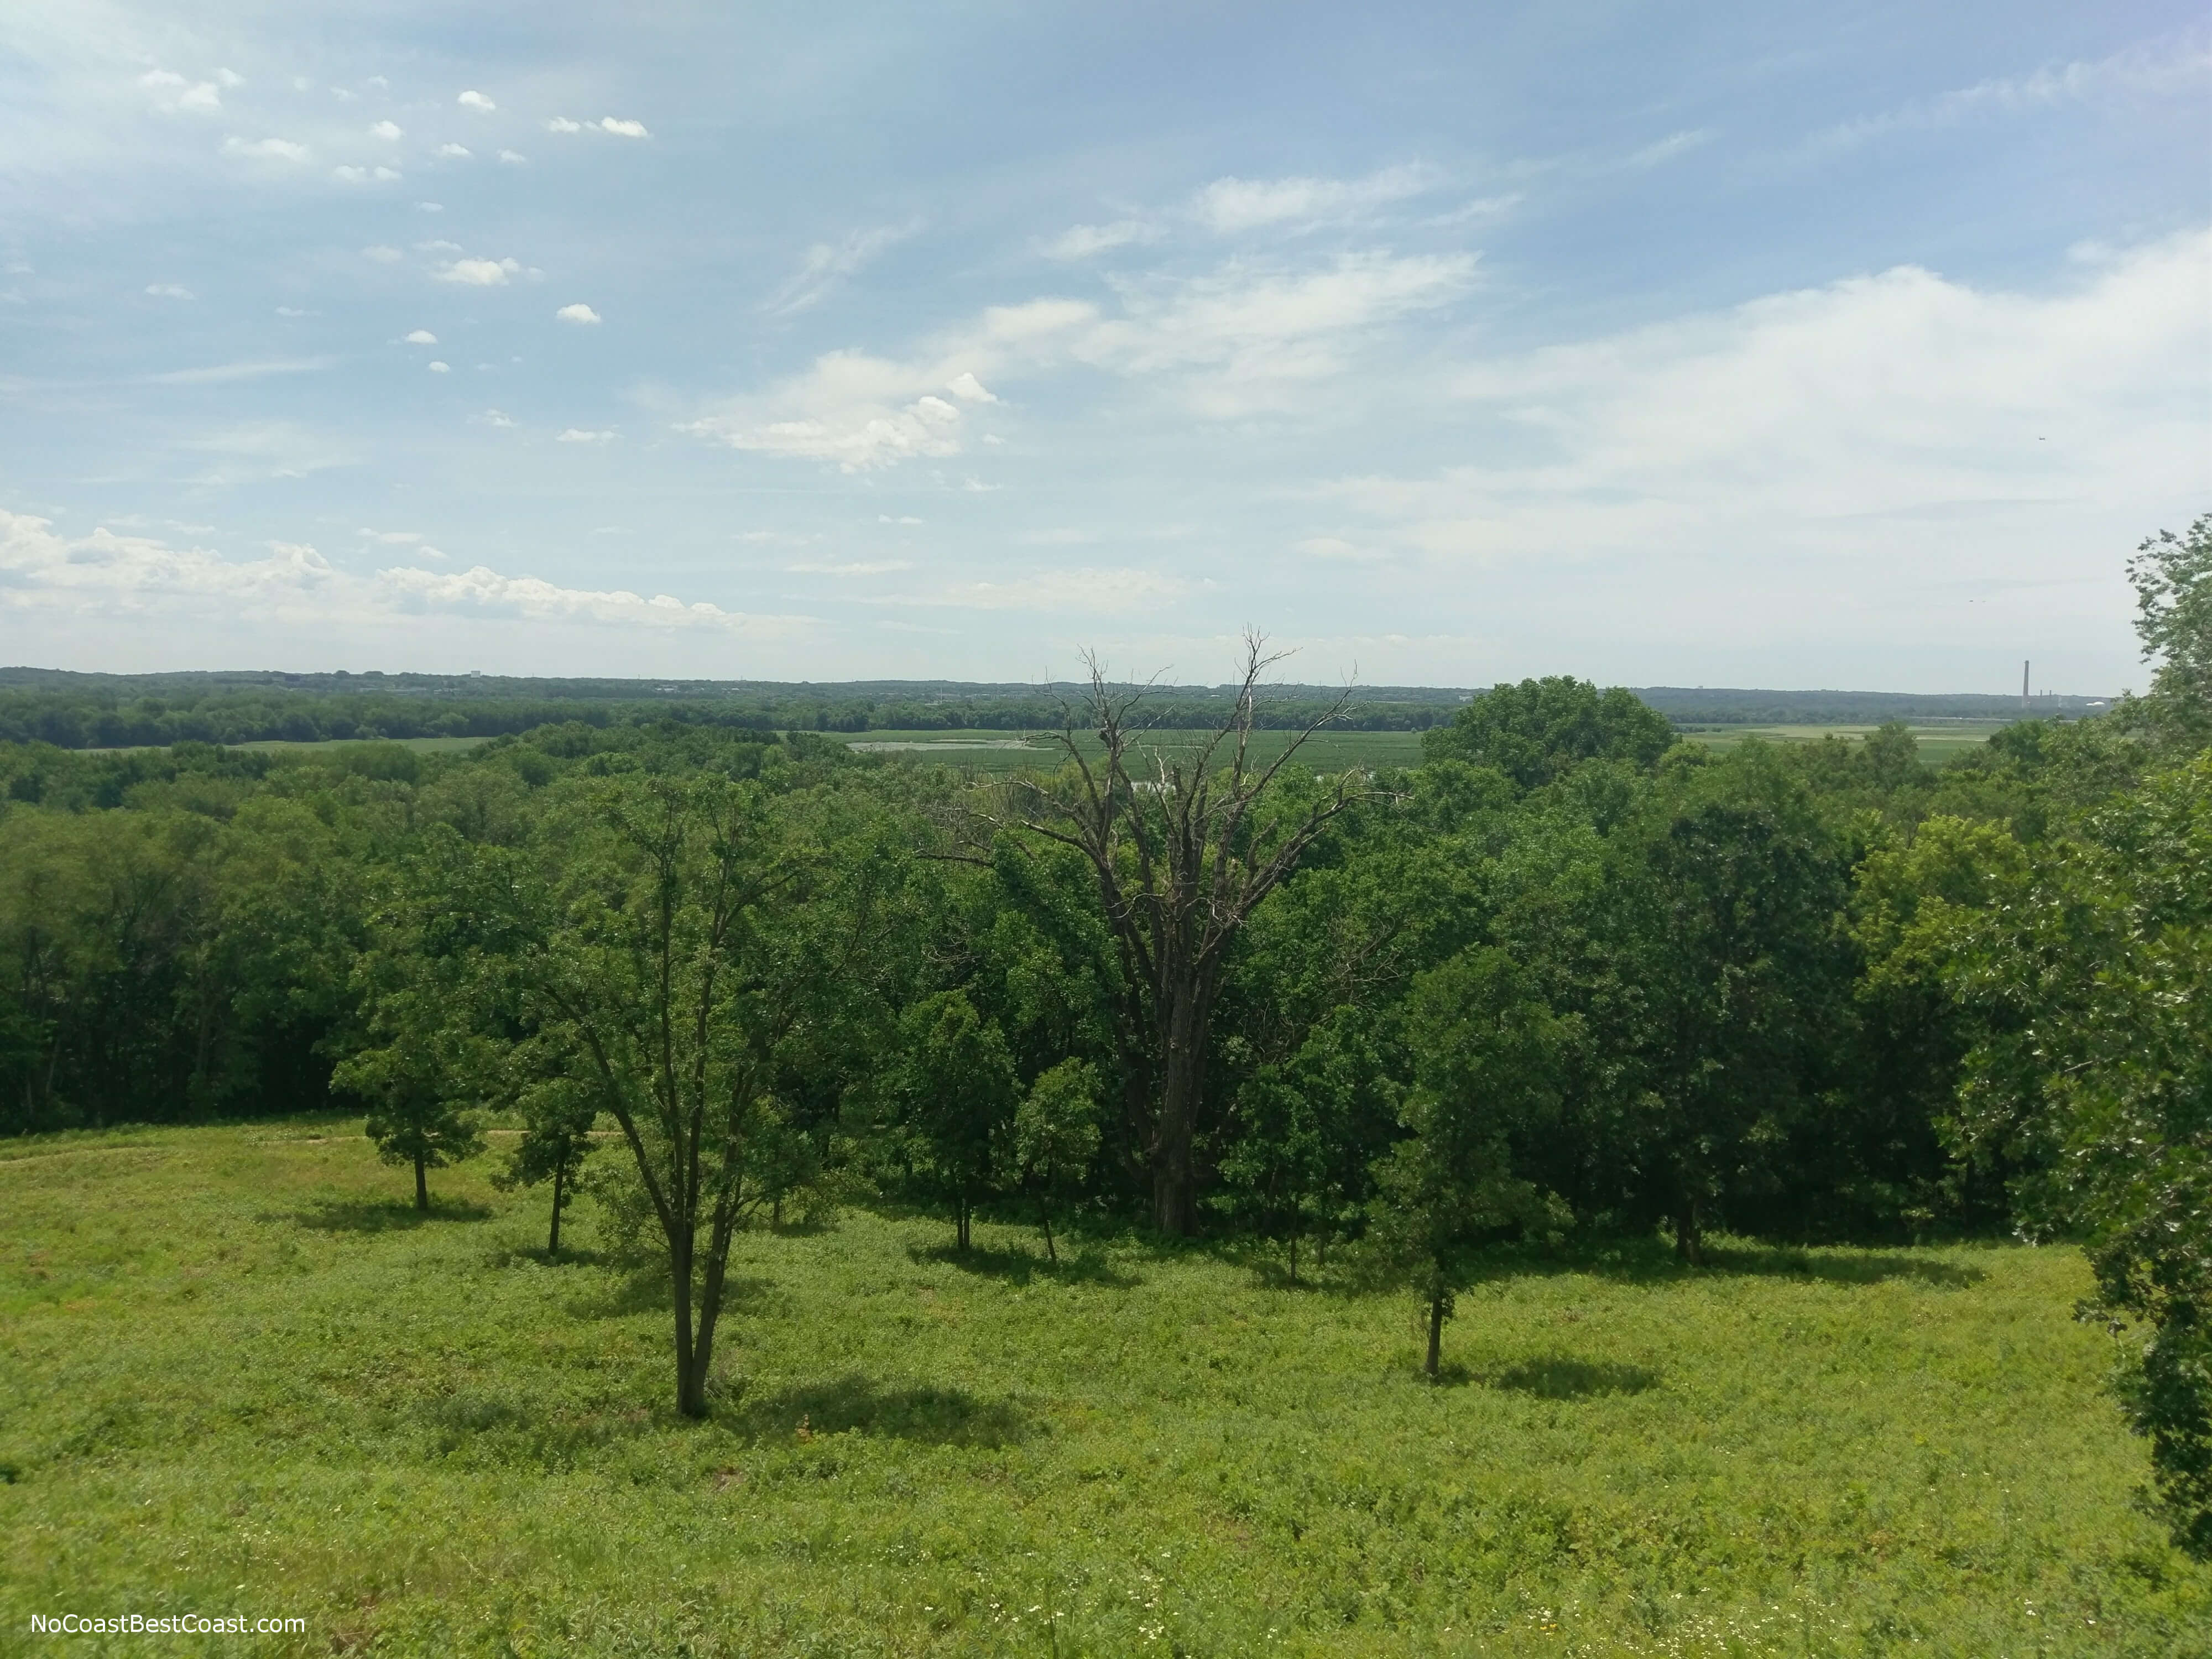 The view from the overlook near the visitor center